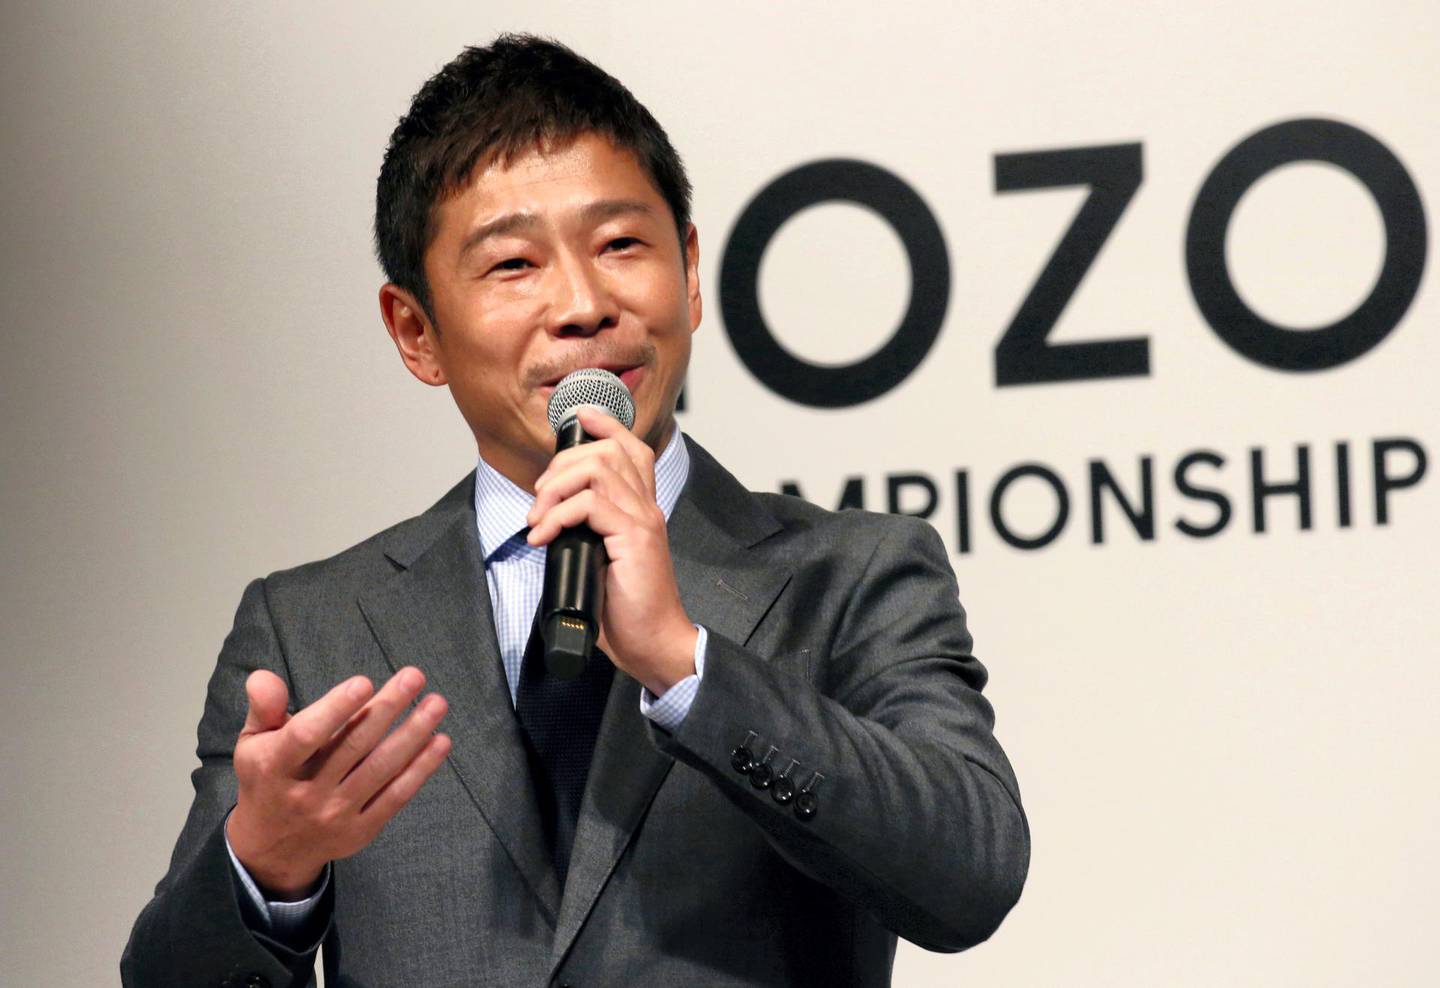 Mandatory Credit: Photo by Koji Sasahara/AP/REX/Shutterstock (9985303b)
ZOZO Inc. President Yusaku Maezawa speaks during a press conference on the PGA Tour in Tokyo, . The PGA Tour will hold its first official tournament, the Zozo Championship, in Japan. And the main sponsor of next year's event, Japanese billionaire Maezawa, is calling the tournament a kind of "moonshot" for golf in his country. Maezawa was announced earlier this year as the first commercial passenger to attempt a flyby around the moon
Golf PGA, Tokyo, Japan - 20 Nov 2018